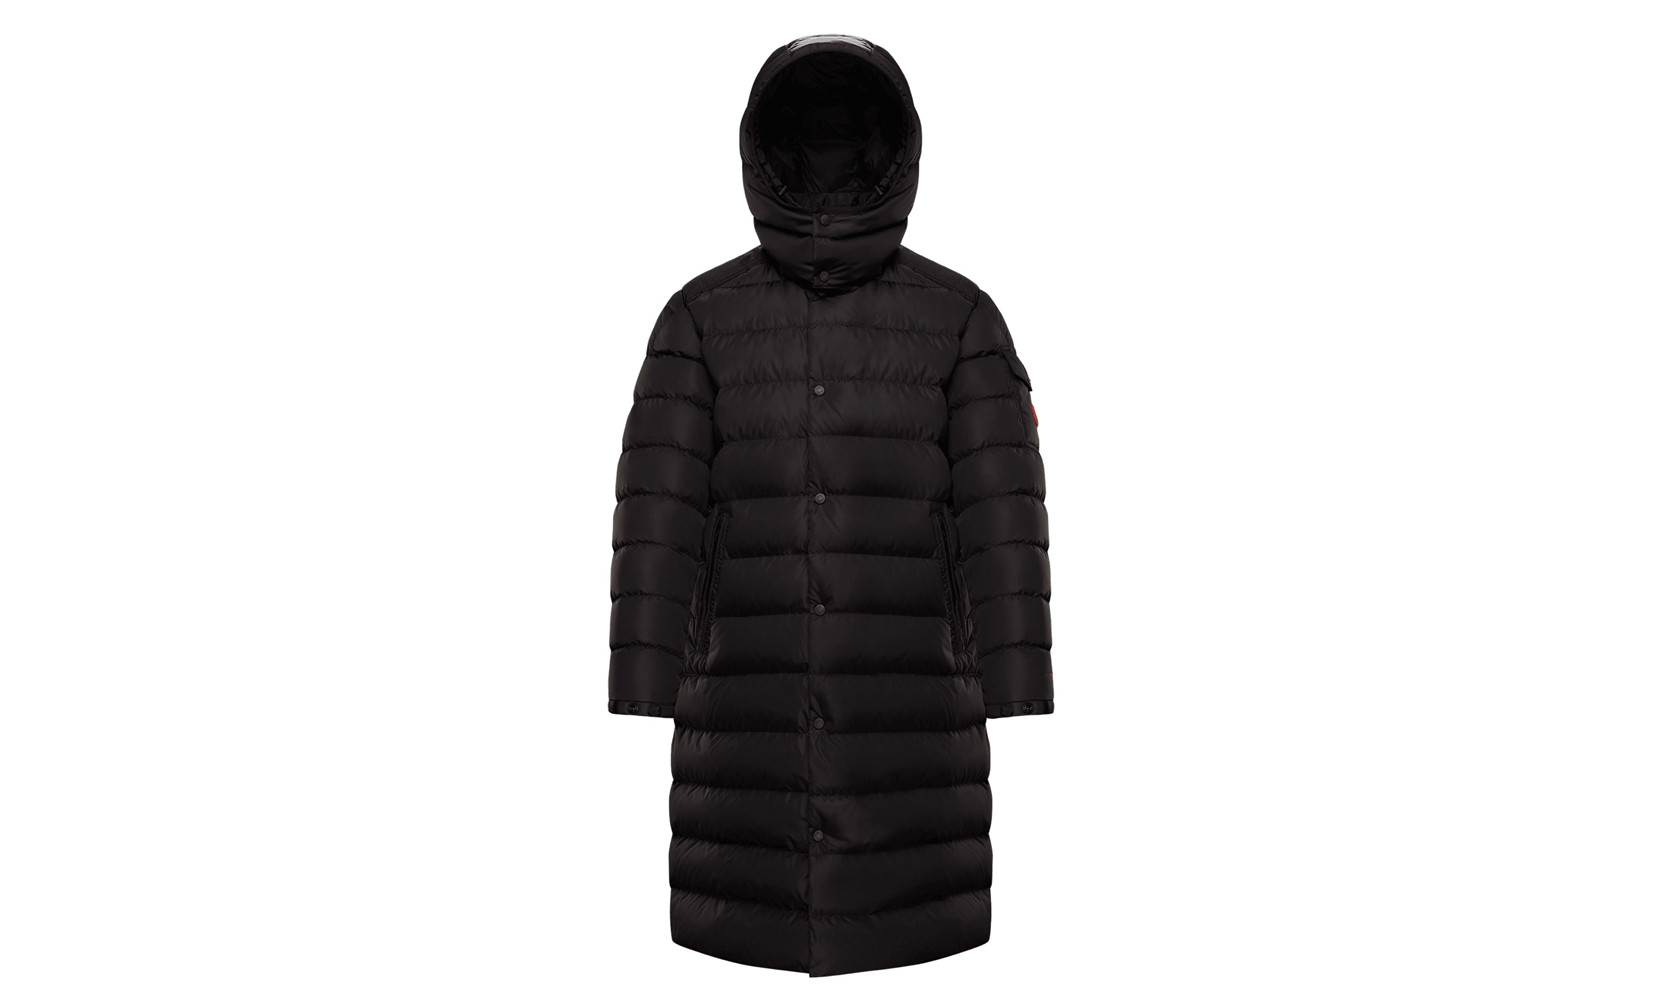 Moncler Born To Protect Jacket